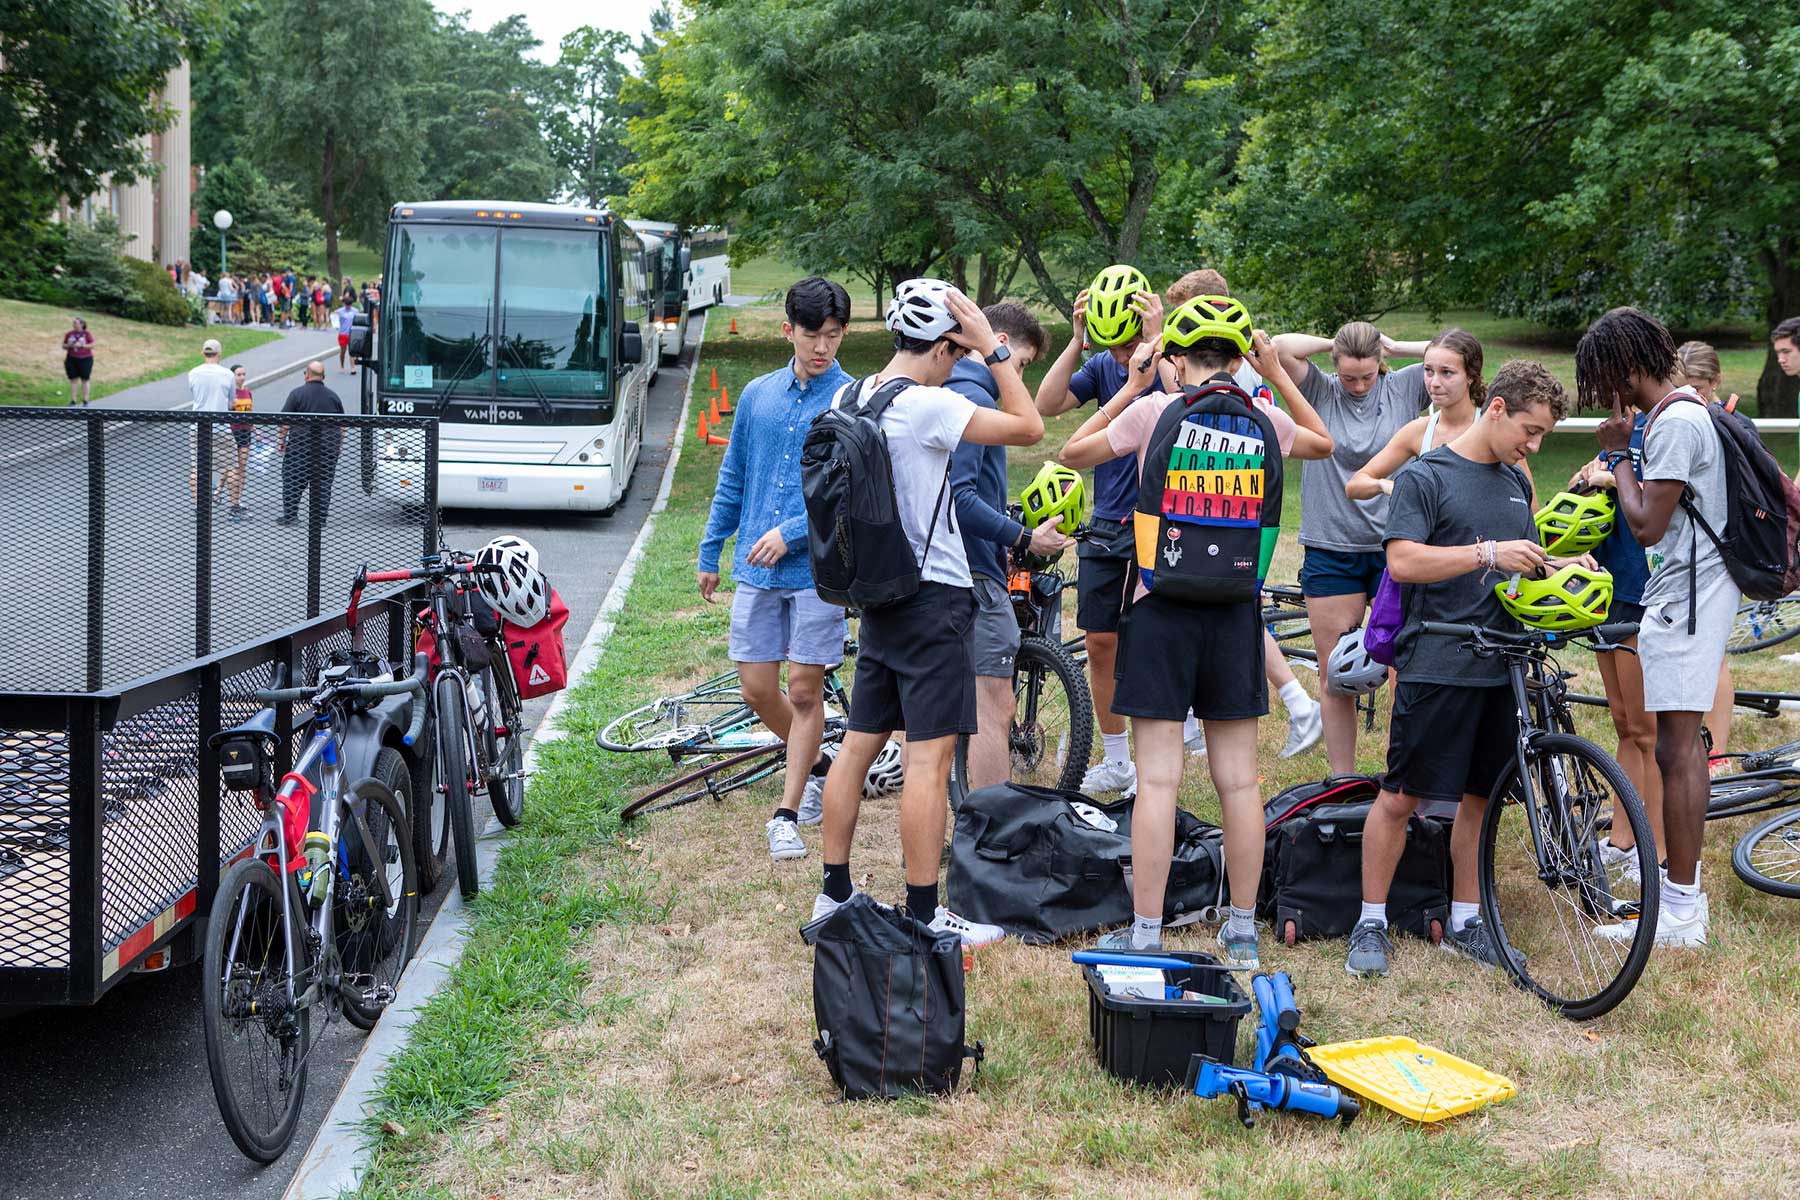 A group of students with bicycles prepares for a ride.